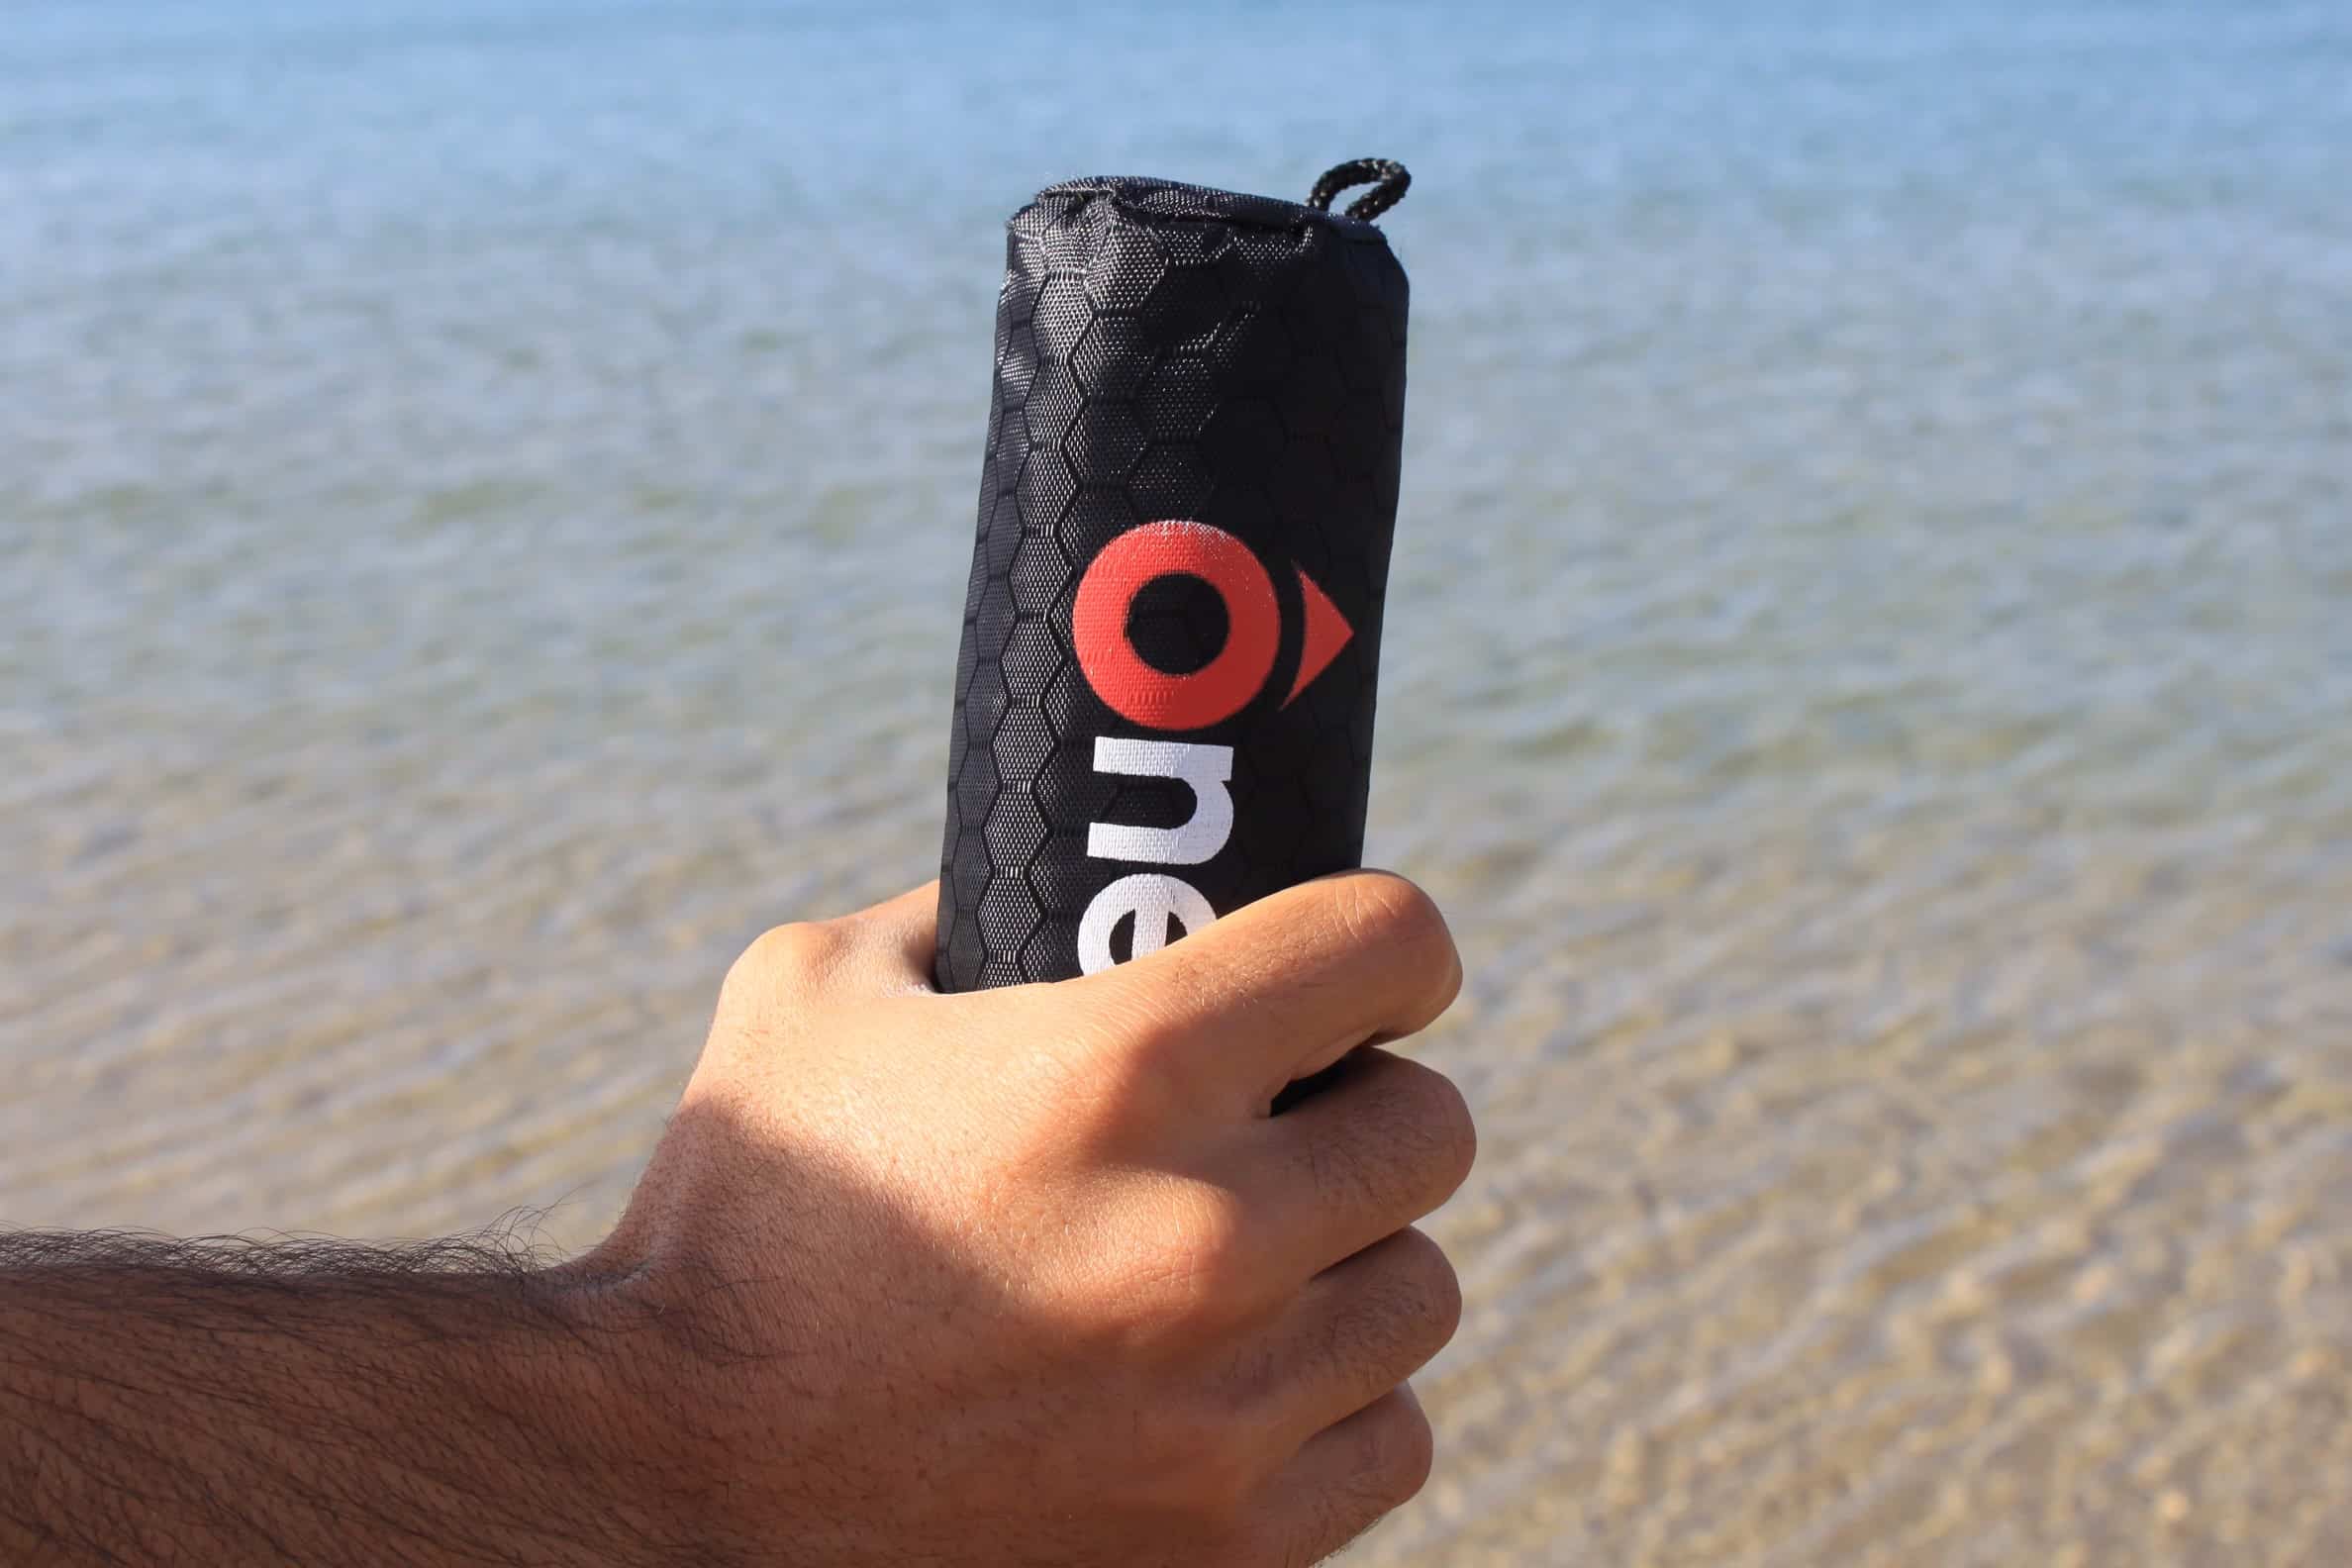 OneUp has created a self-inflating life preserver that may bring peace of mind as you boat, play at the beach and in your pool